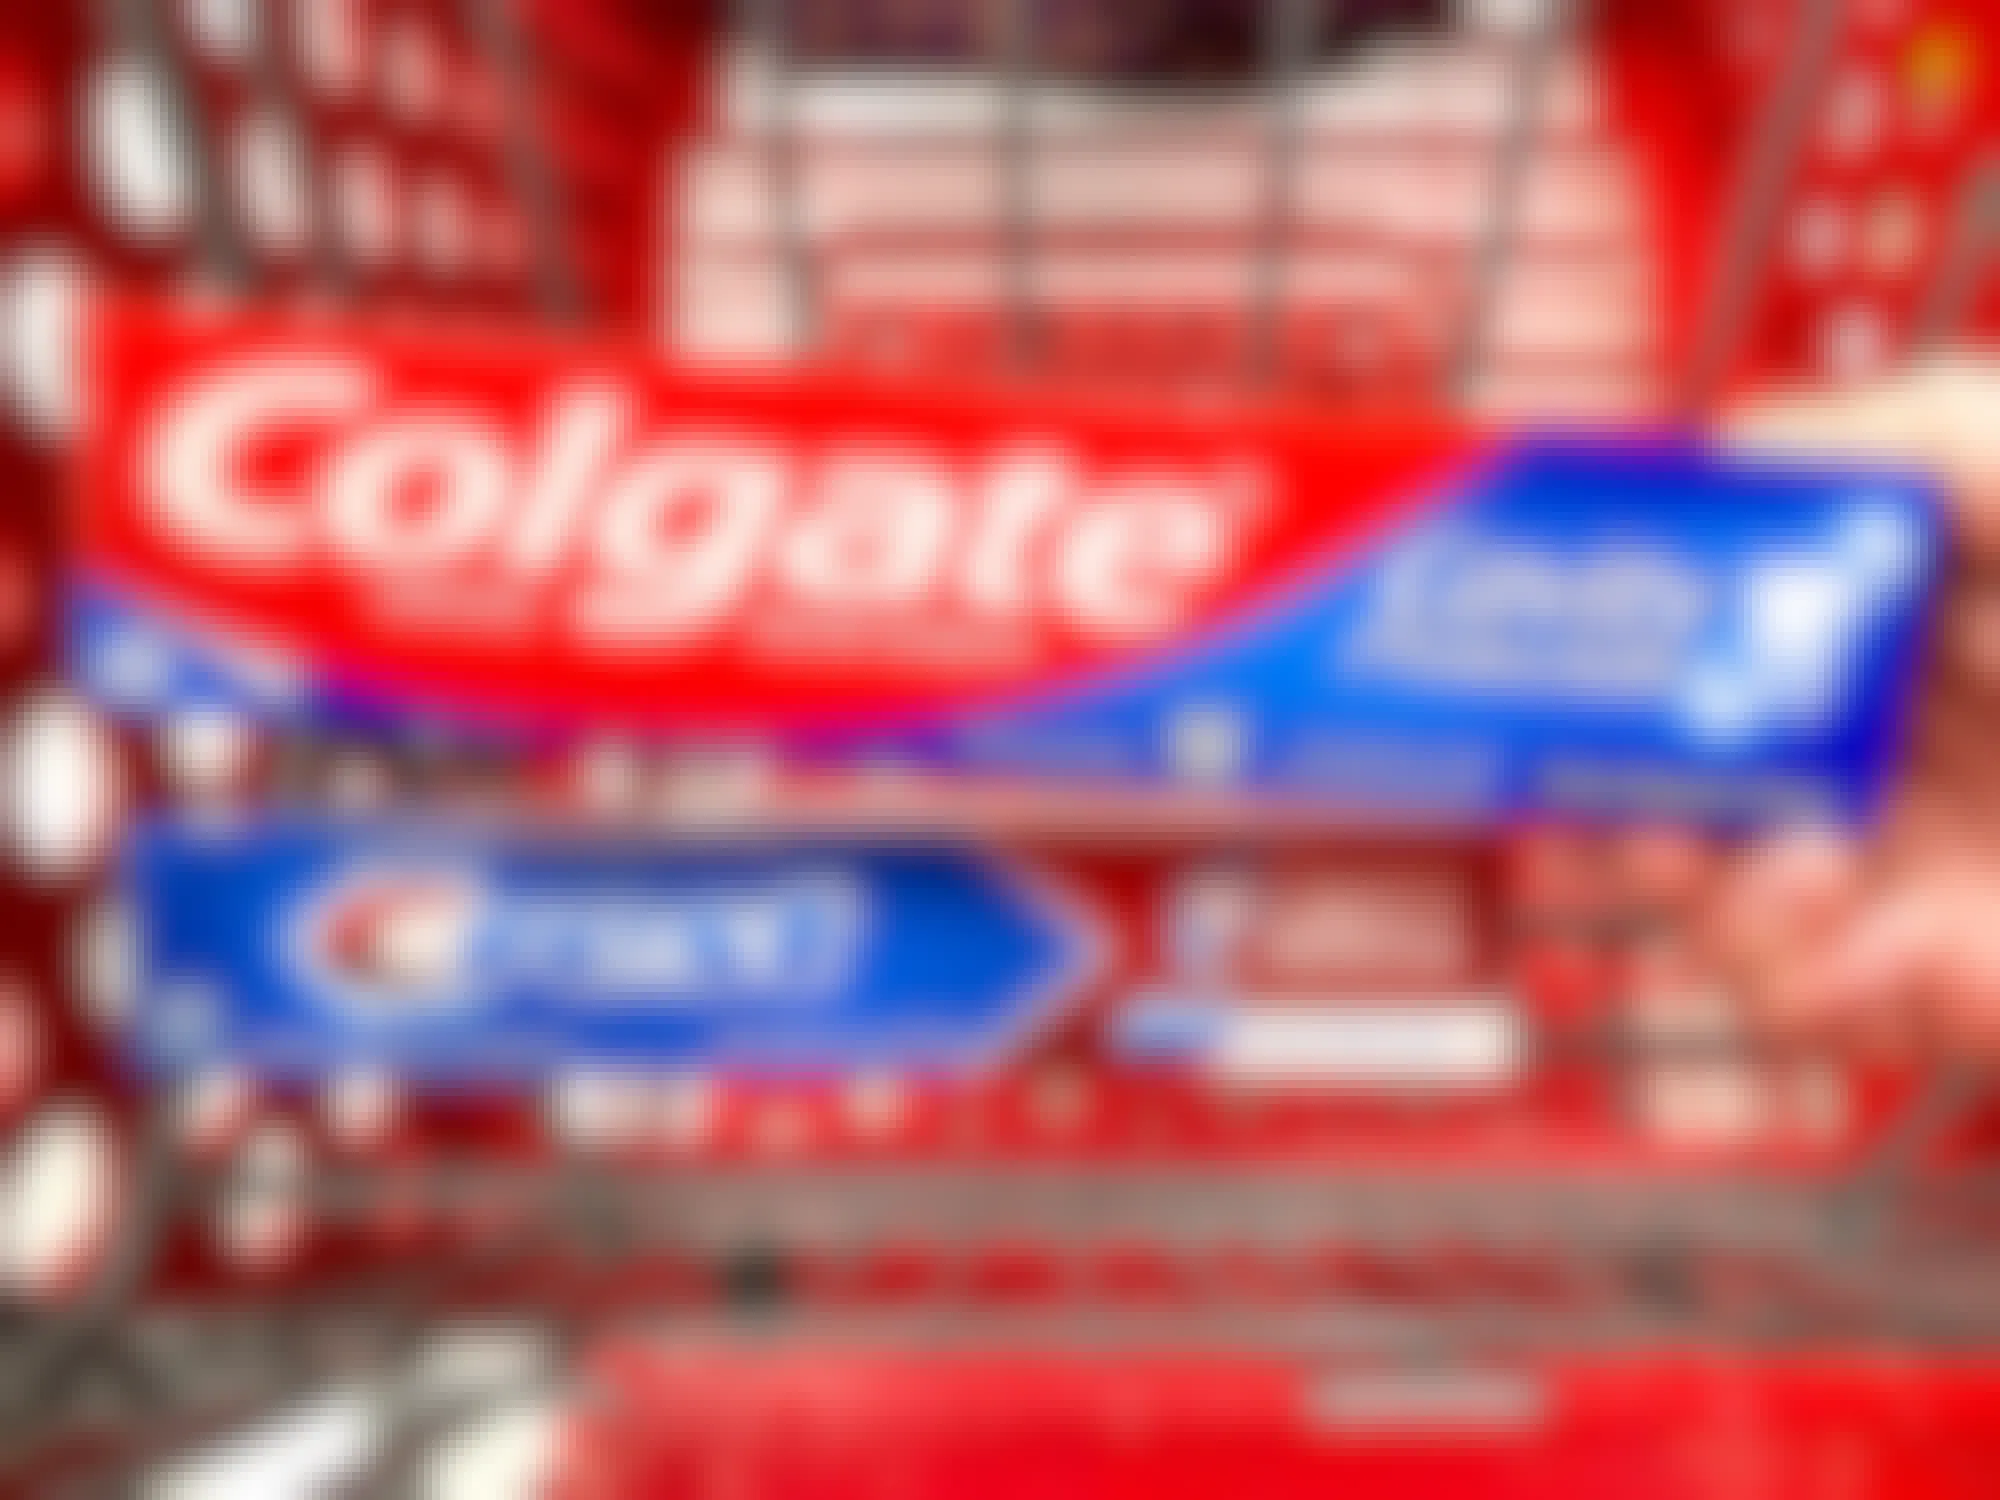 colgate and crest cavity protection toothpaste boxes in target cart